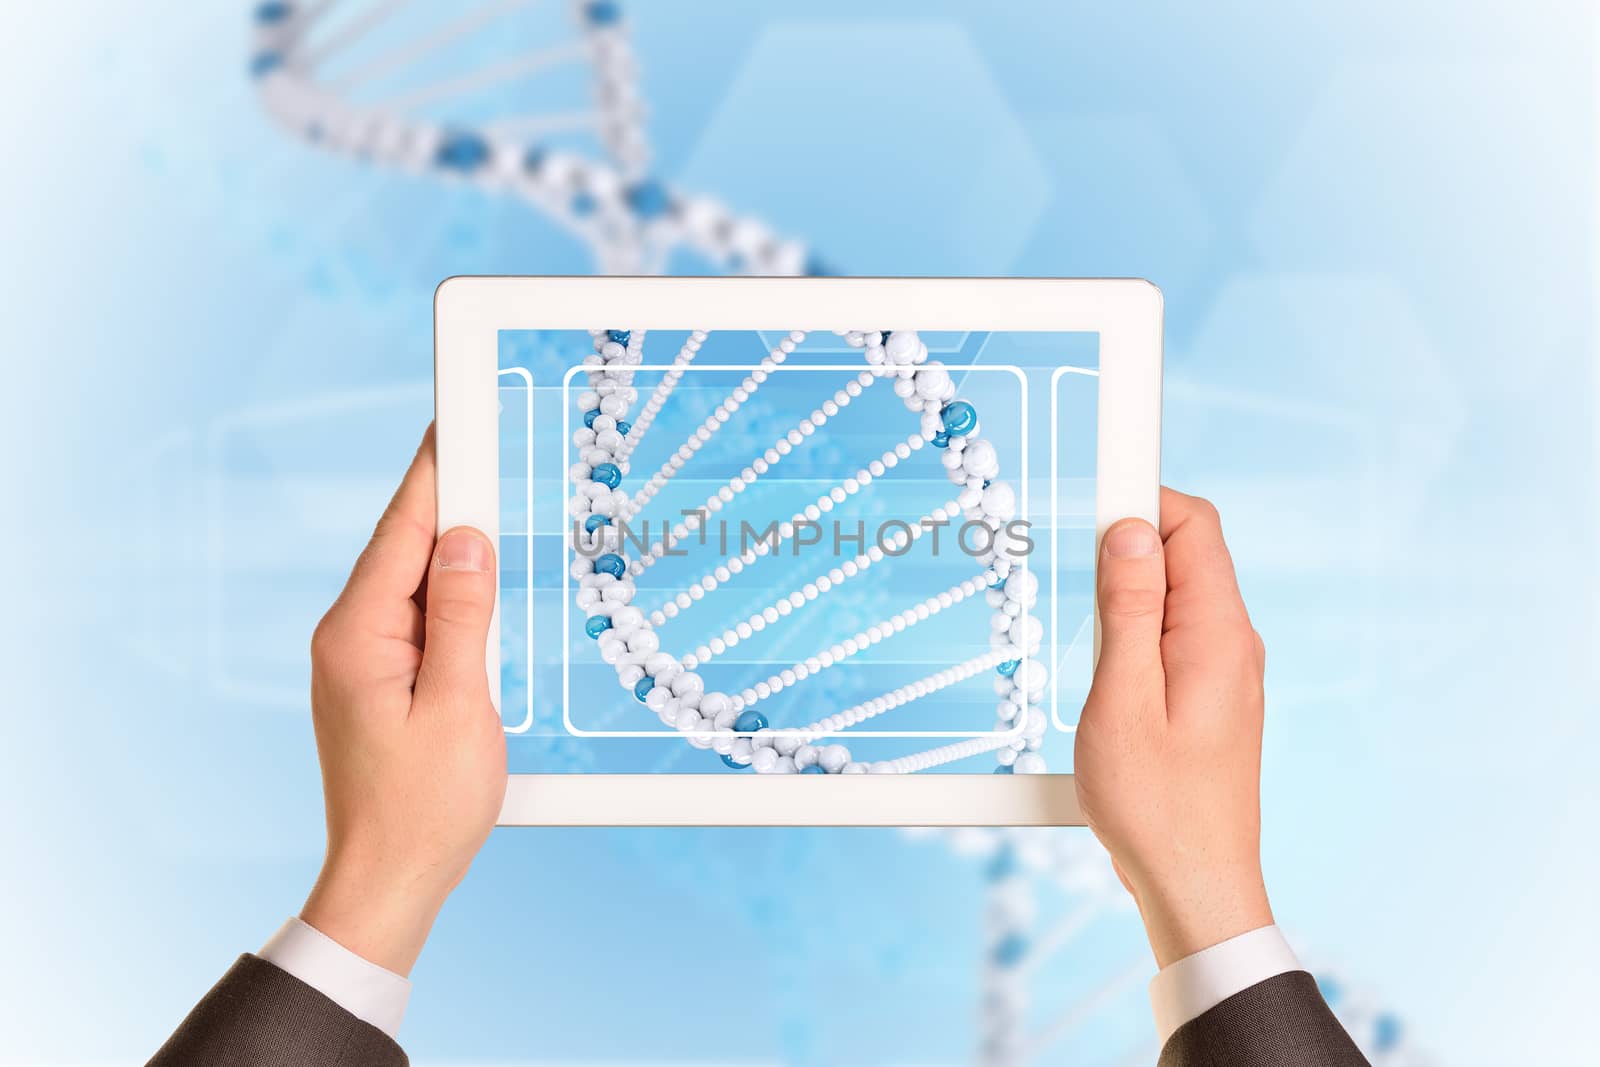 Man hands using tablet pc. Image of DNA helix on tablet screen